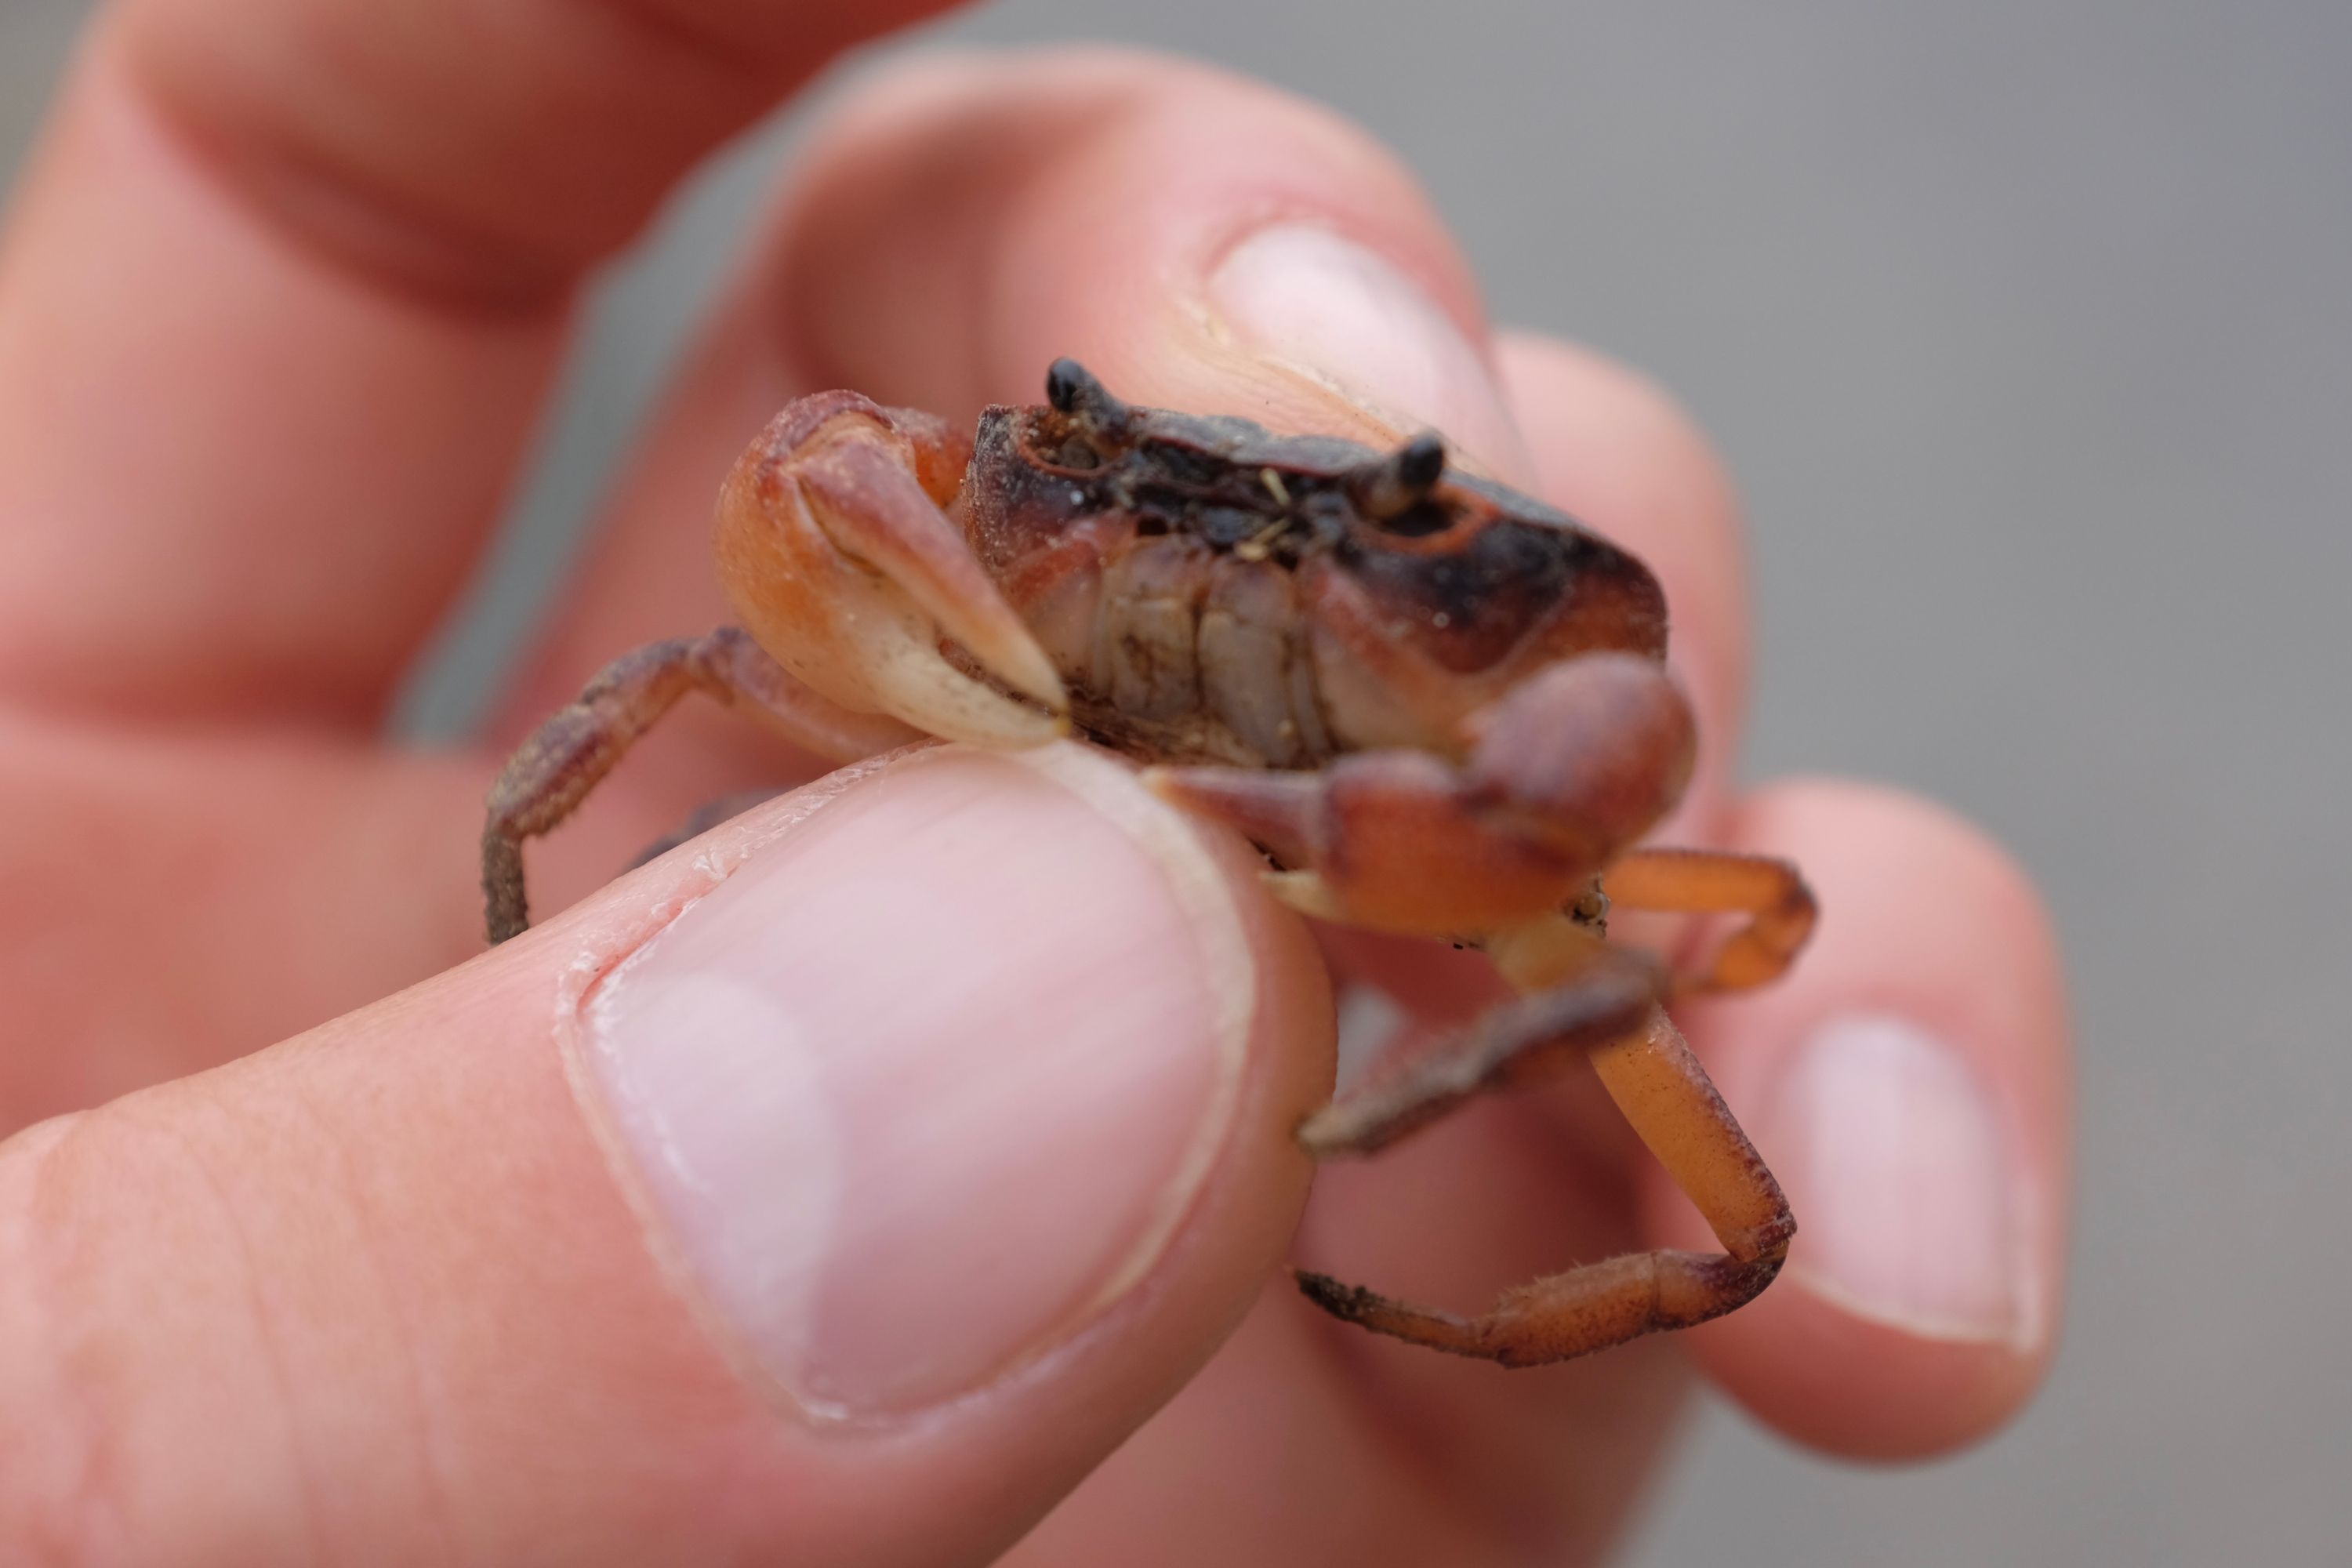 The author holds a small land crab in his left hand.